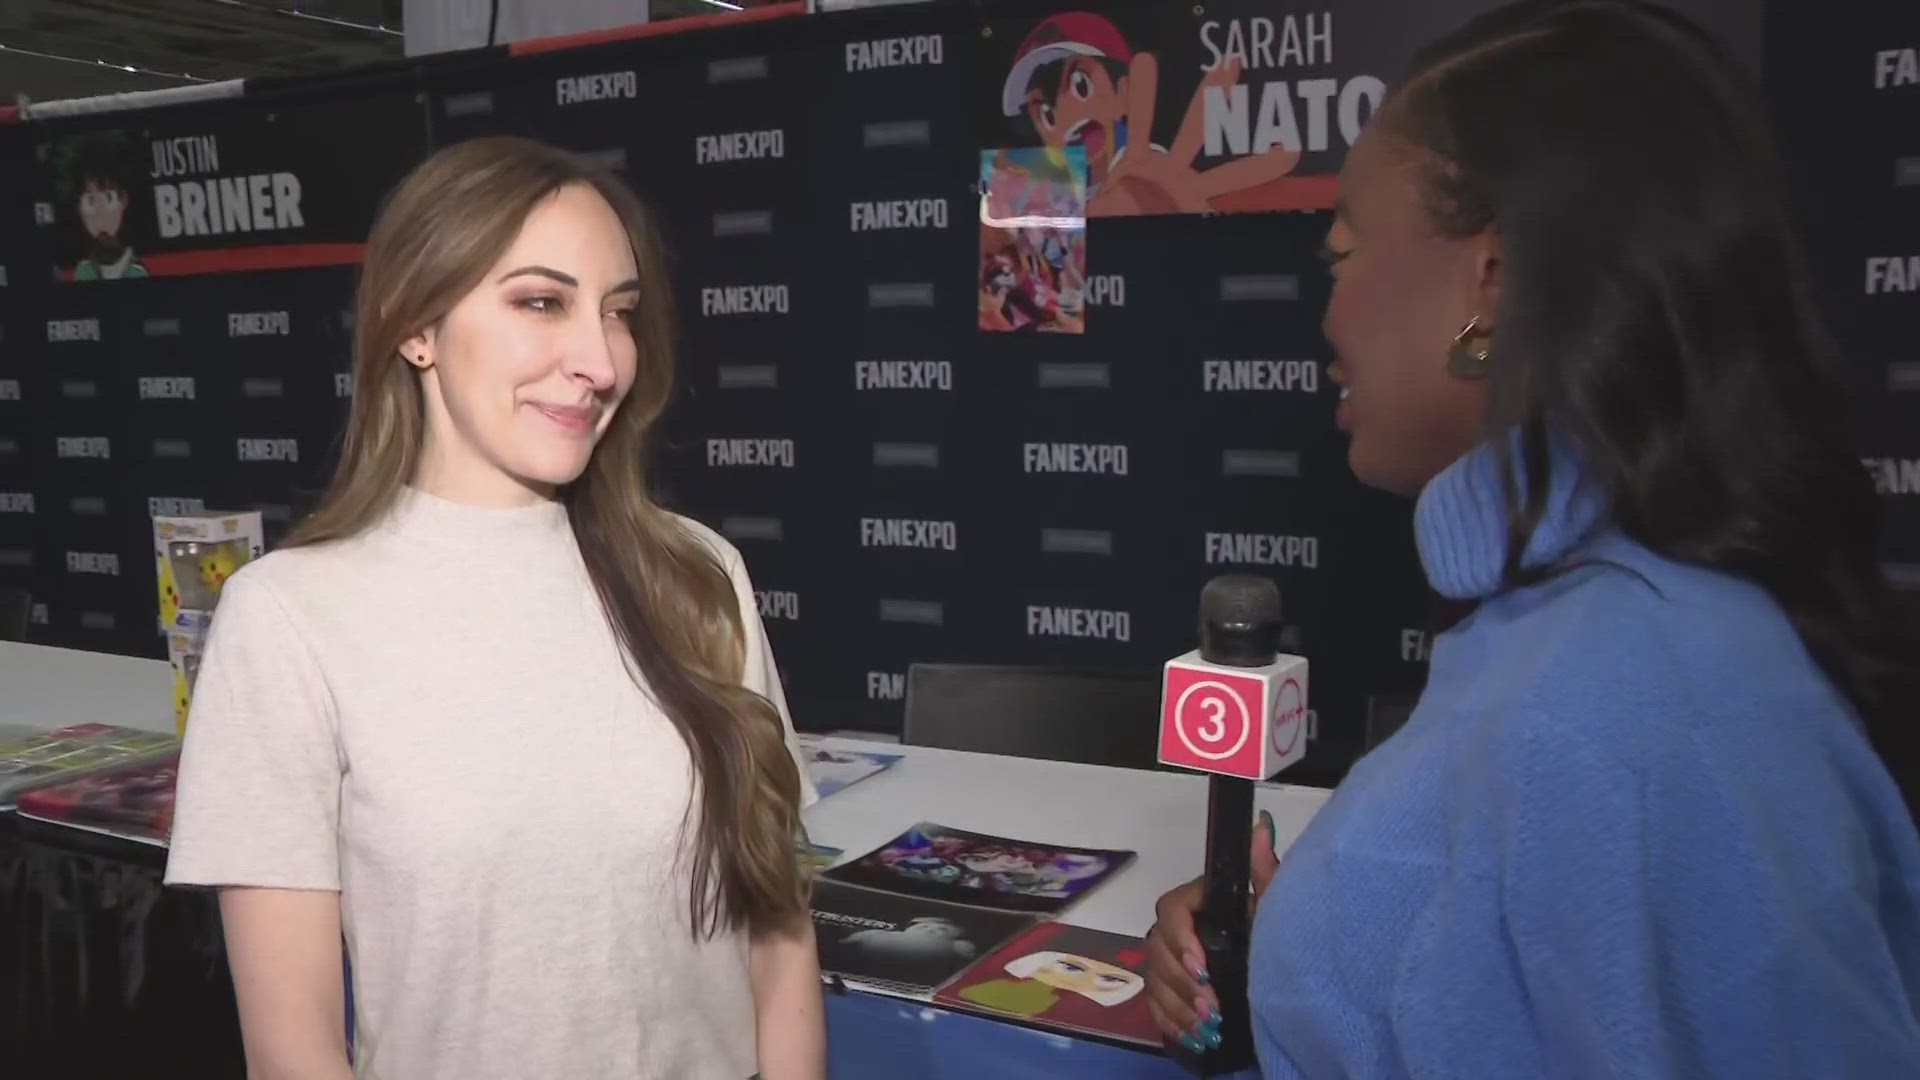 Sarah Natochenny, English language voice of protagonist Ash Ketchum from the "Pokémon" series, joins 3News' Kierra Cotton from Fan Expo Cleveland 2024